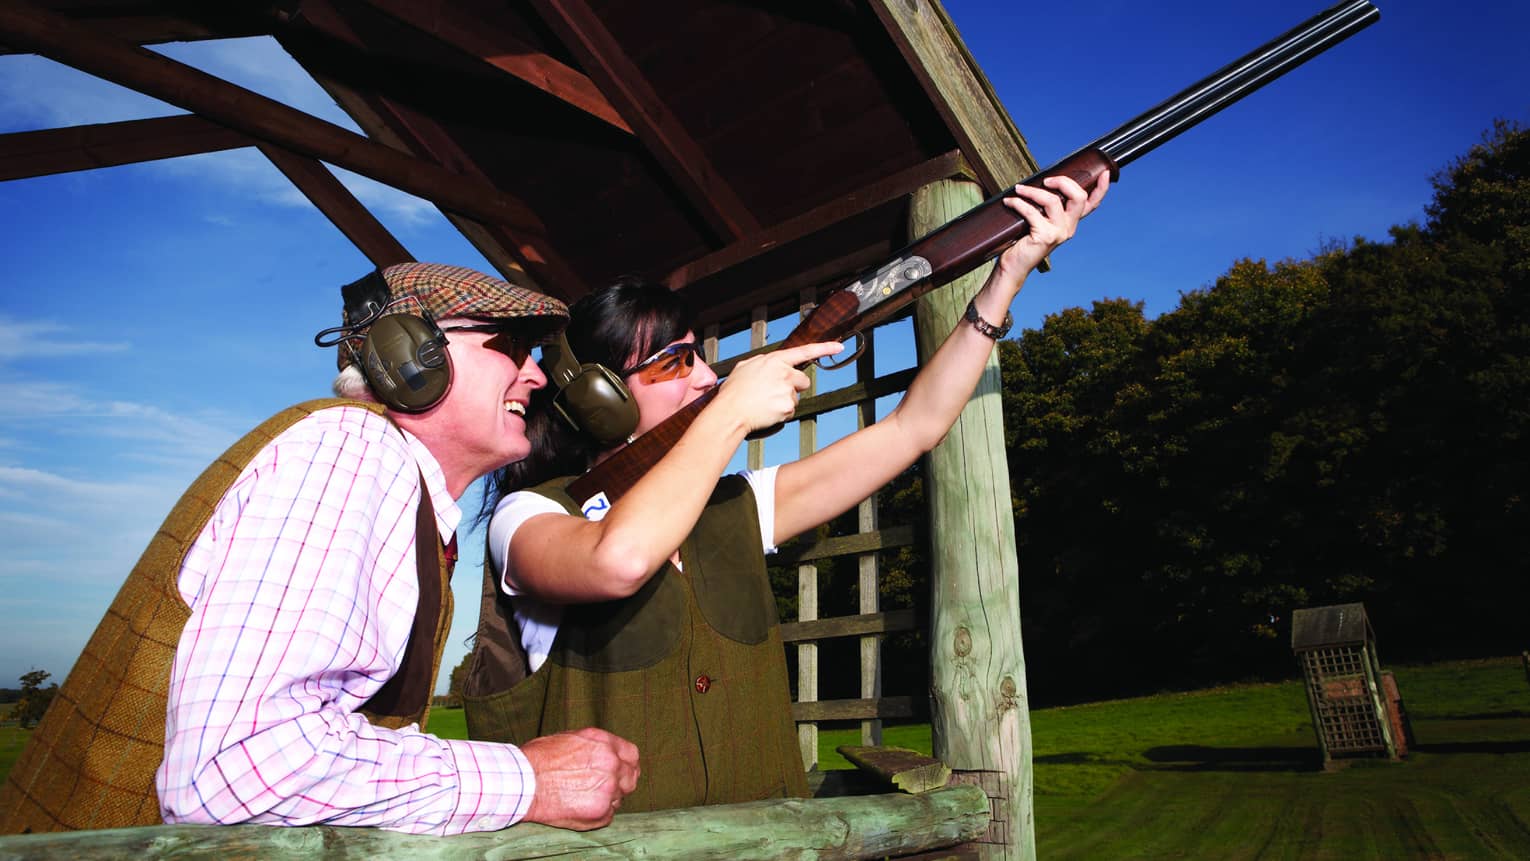 A man and woman shooting clay pigeons outside